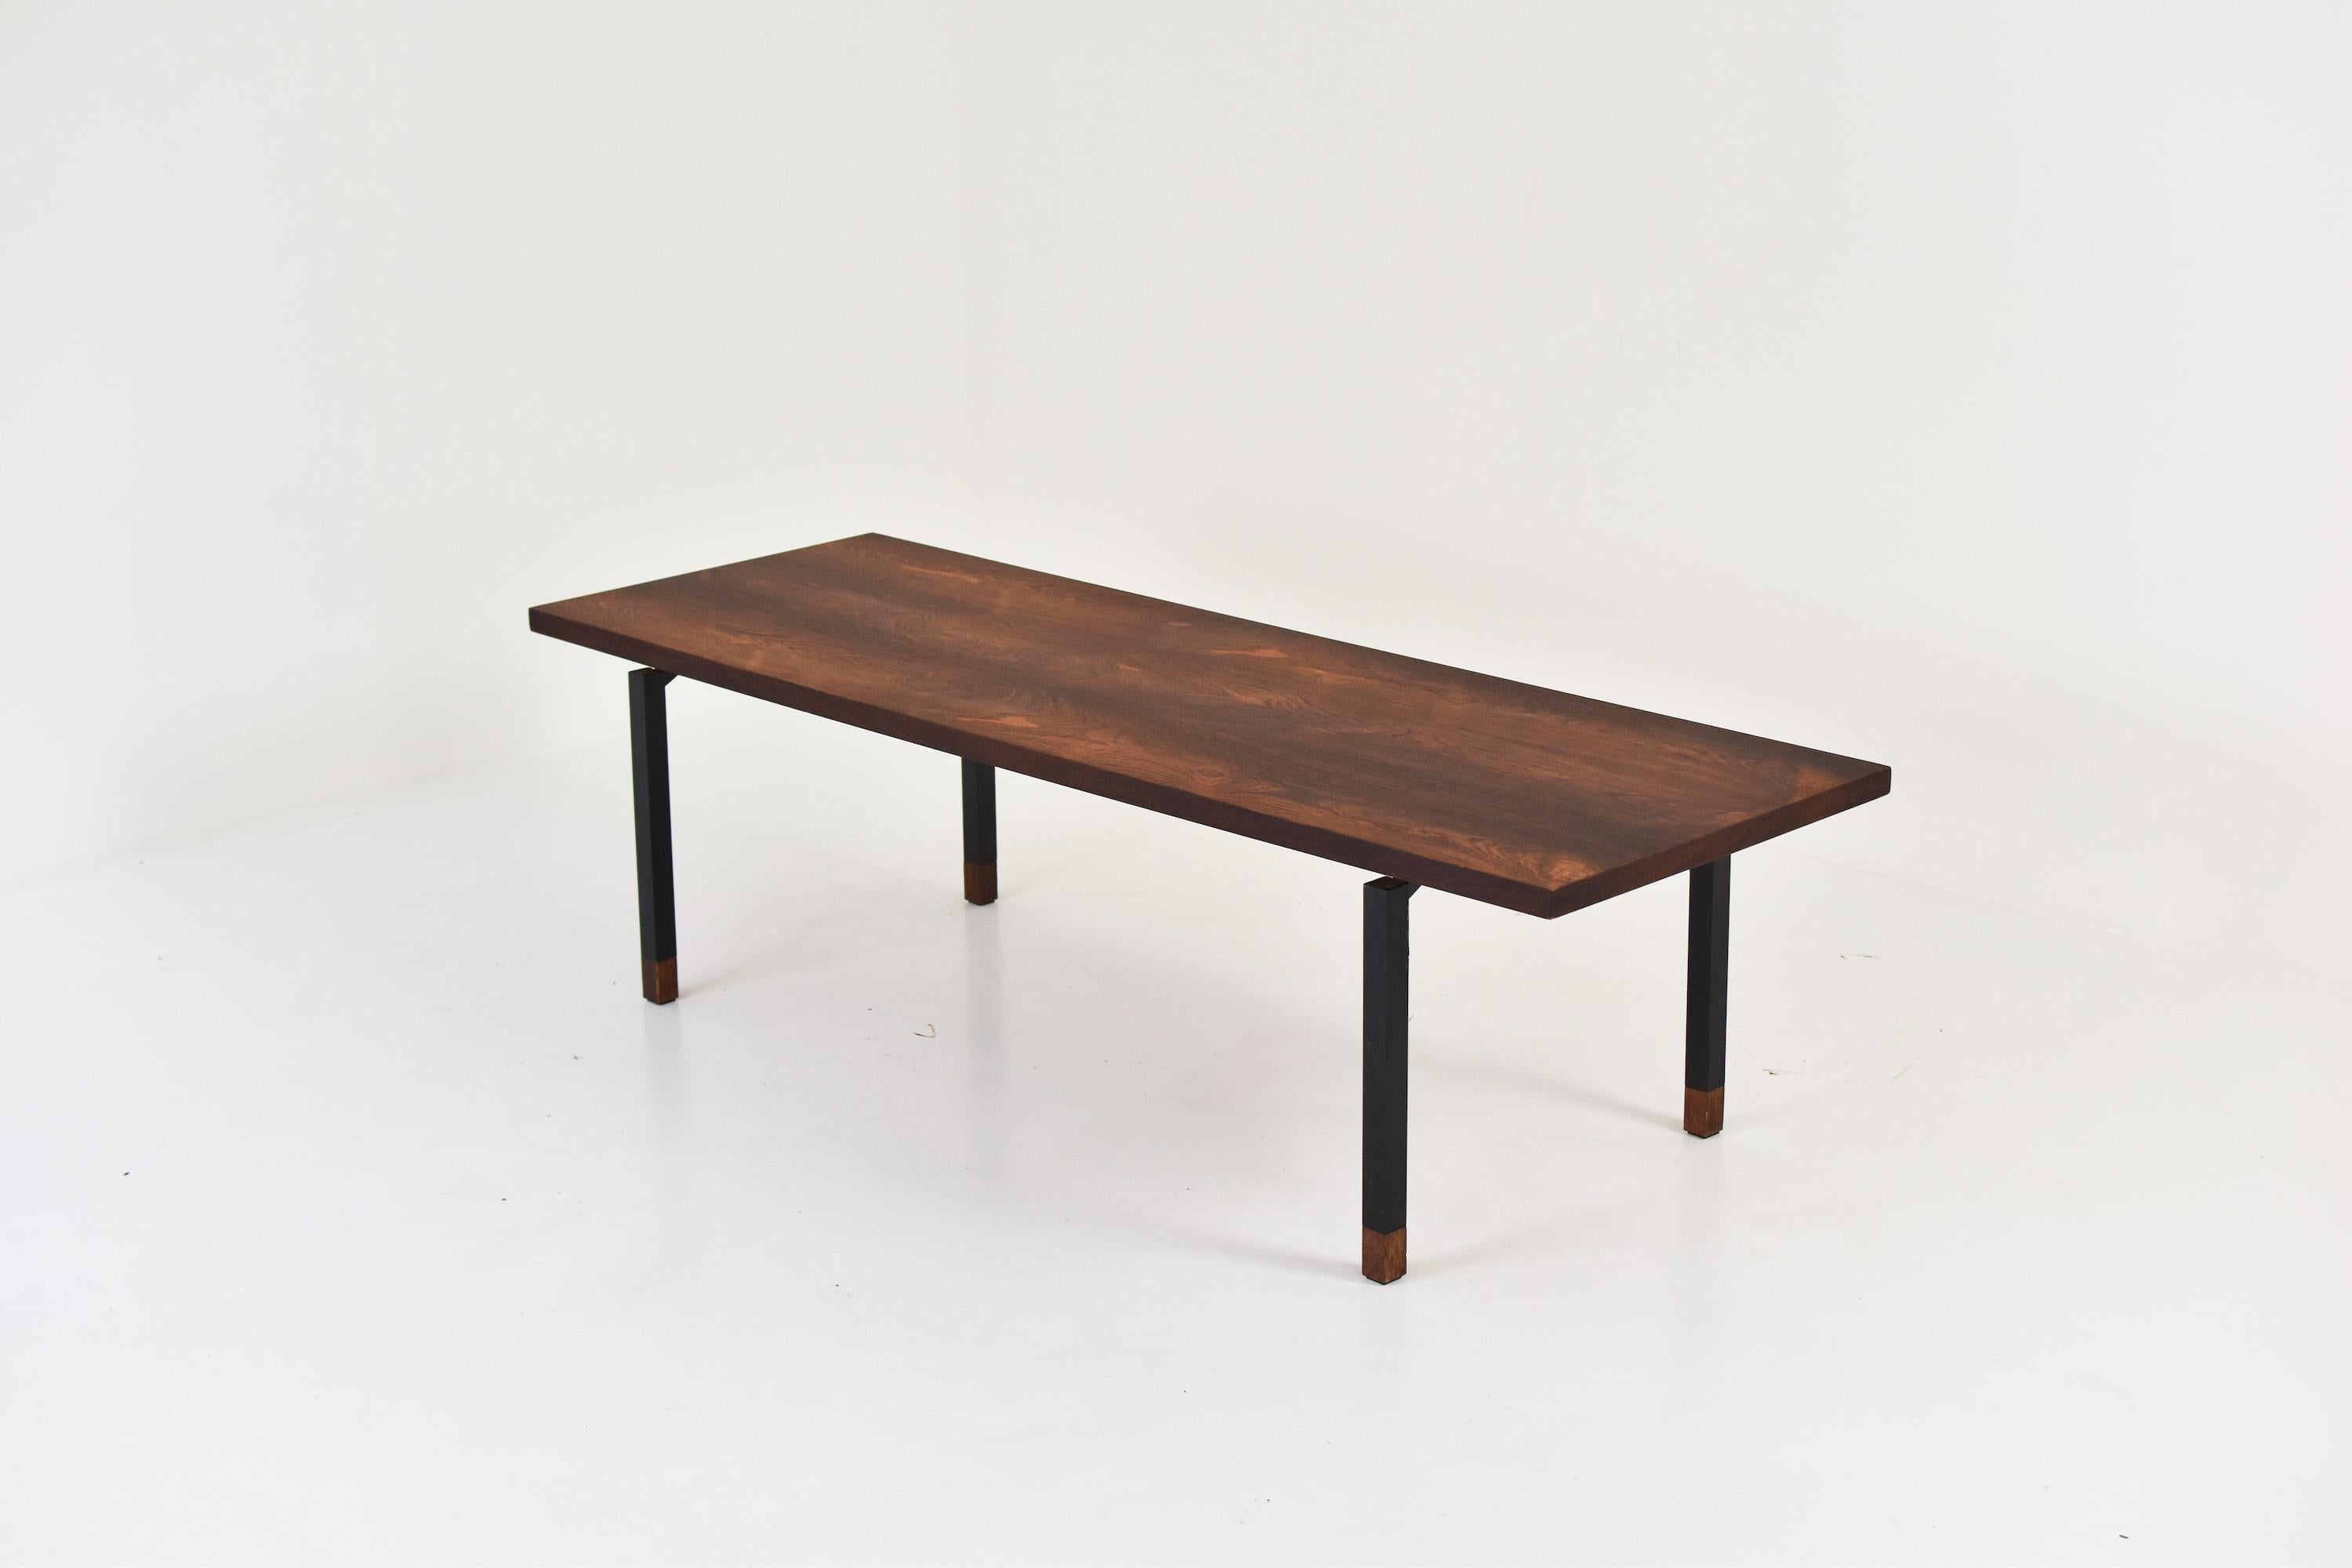 Rosewood coffee table from Denmark 1950’s. This Modern coffee or side table features a black lacquered steel frame with rosewood socks and a floating rosewood top with an amazing grain ! In the manner of Johannes Aasbjerg for Illums Bolighus.